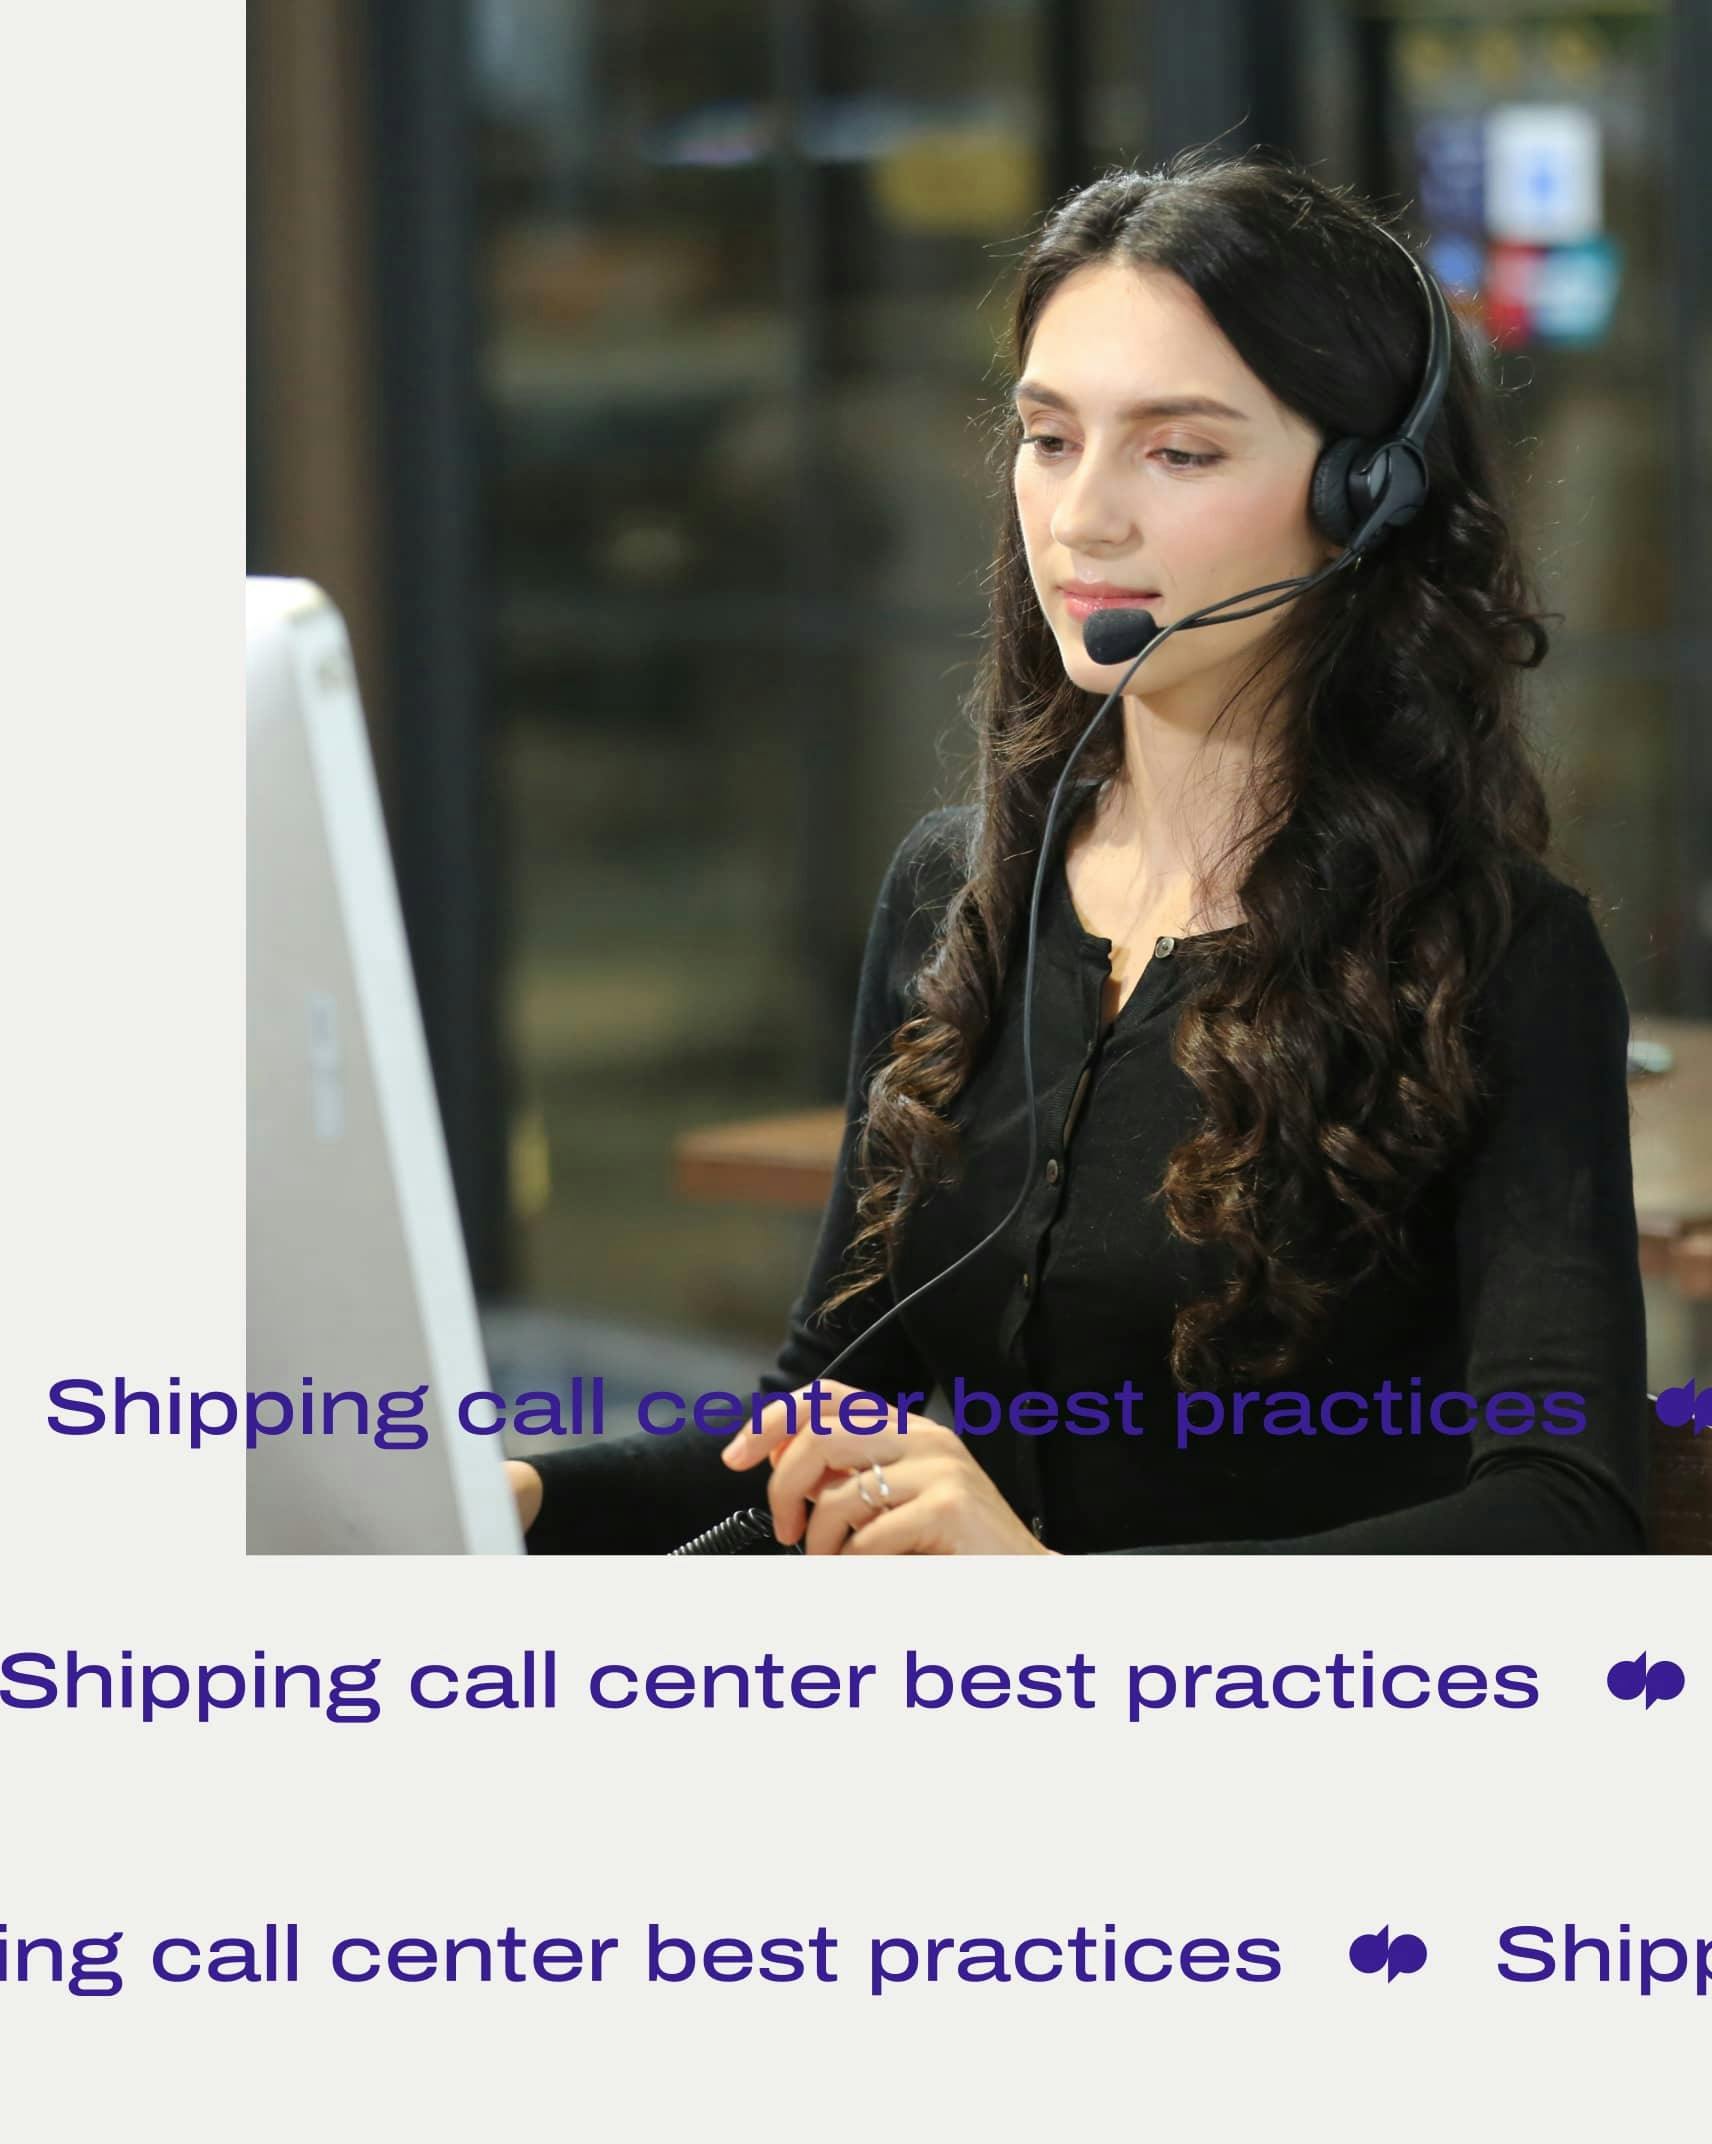 Shipping call center best practices card